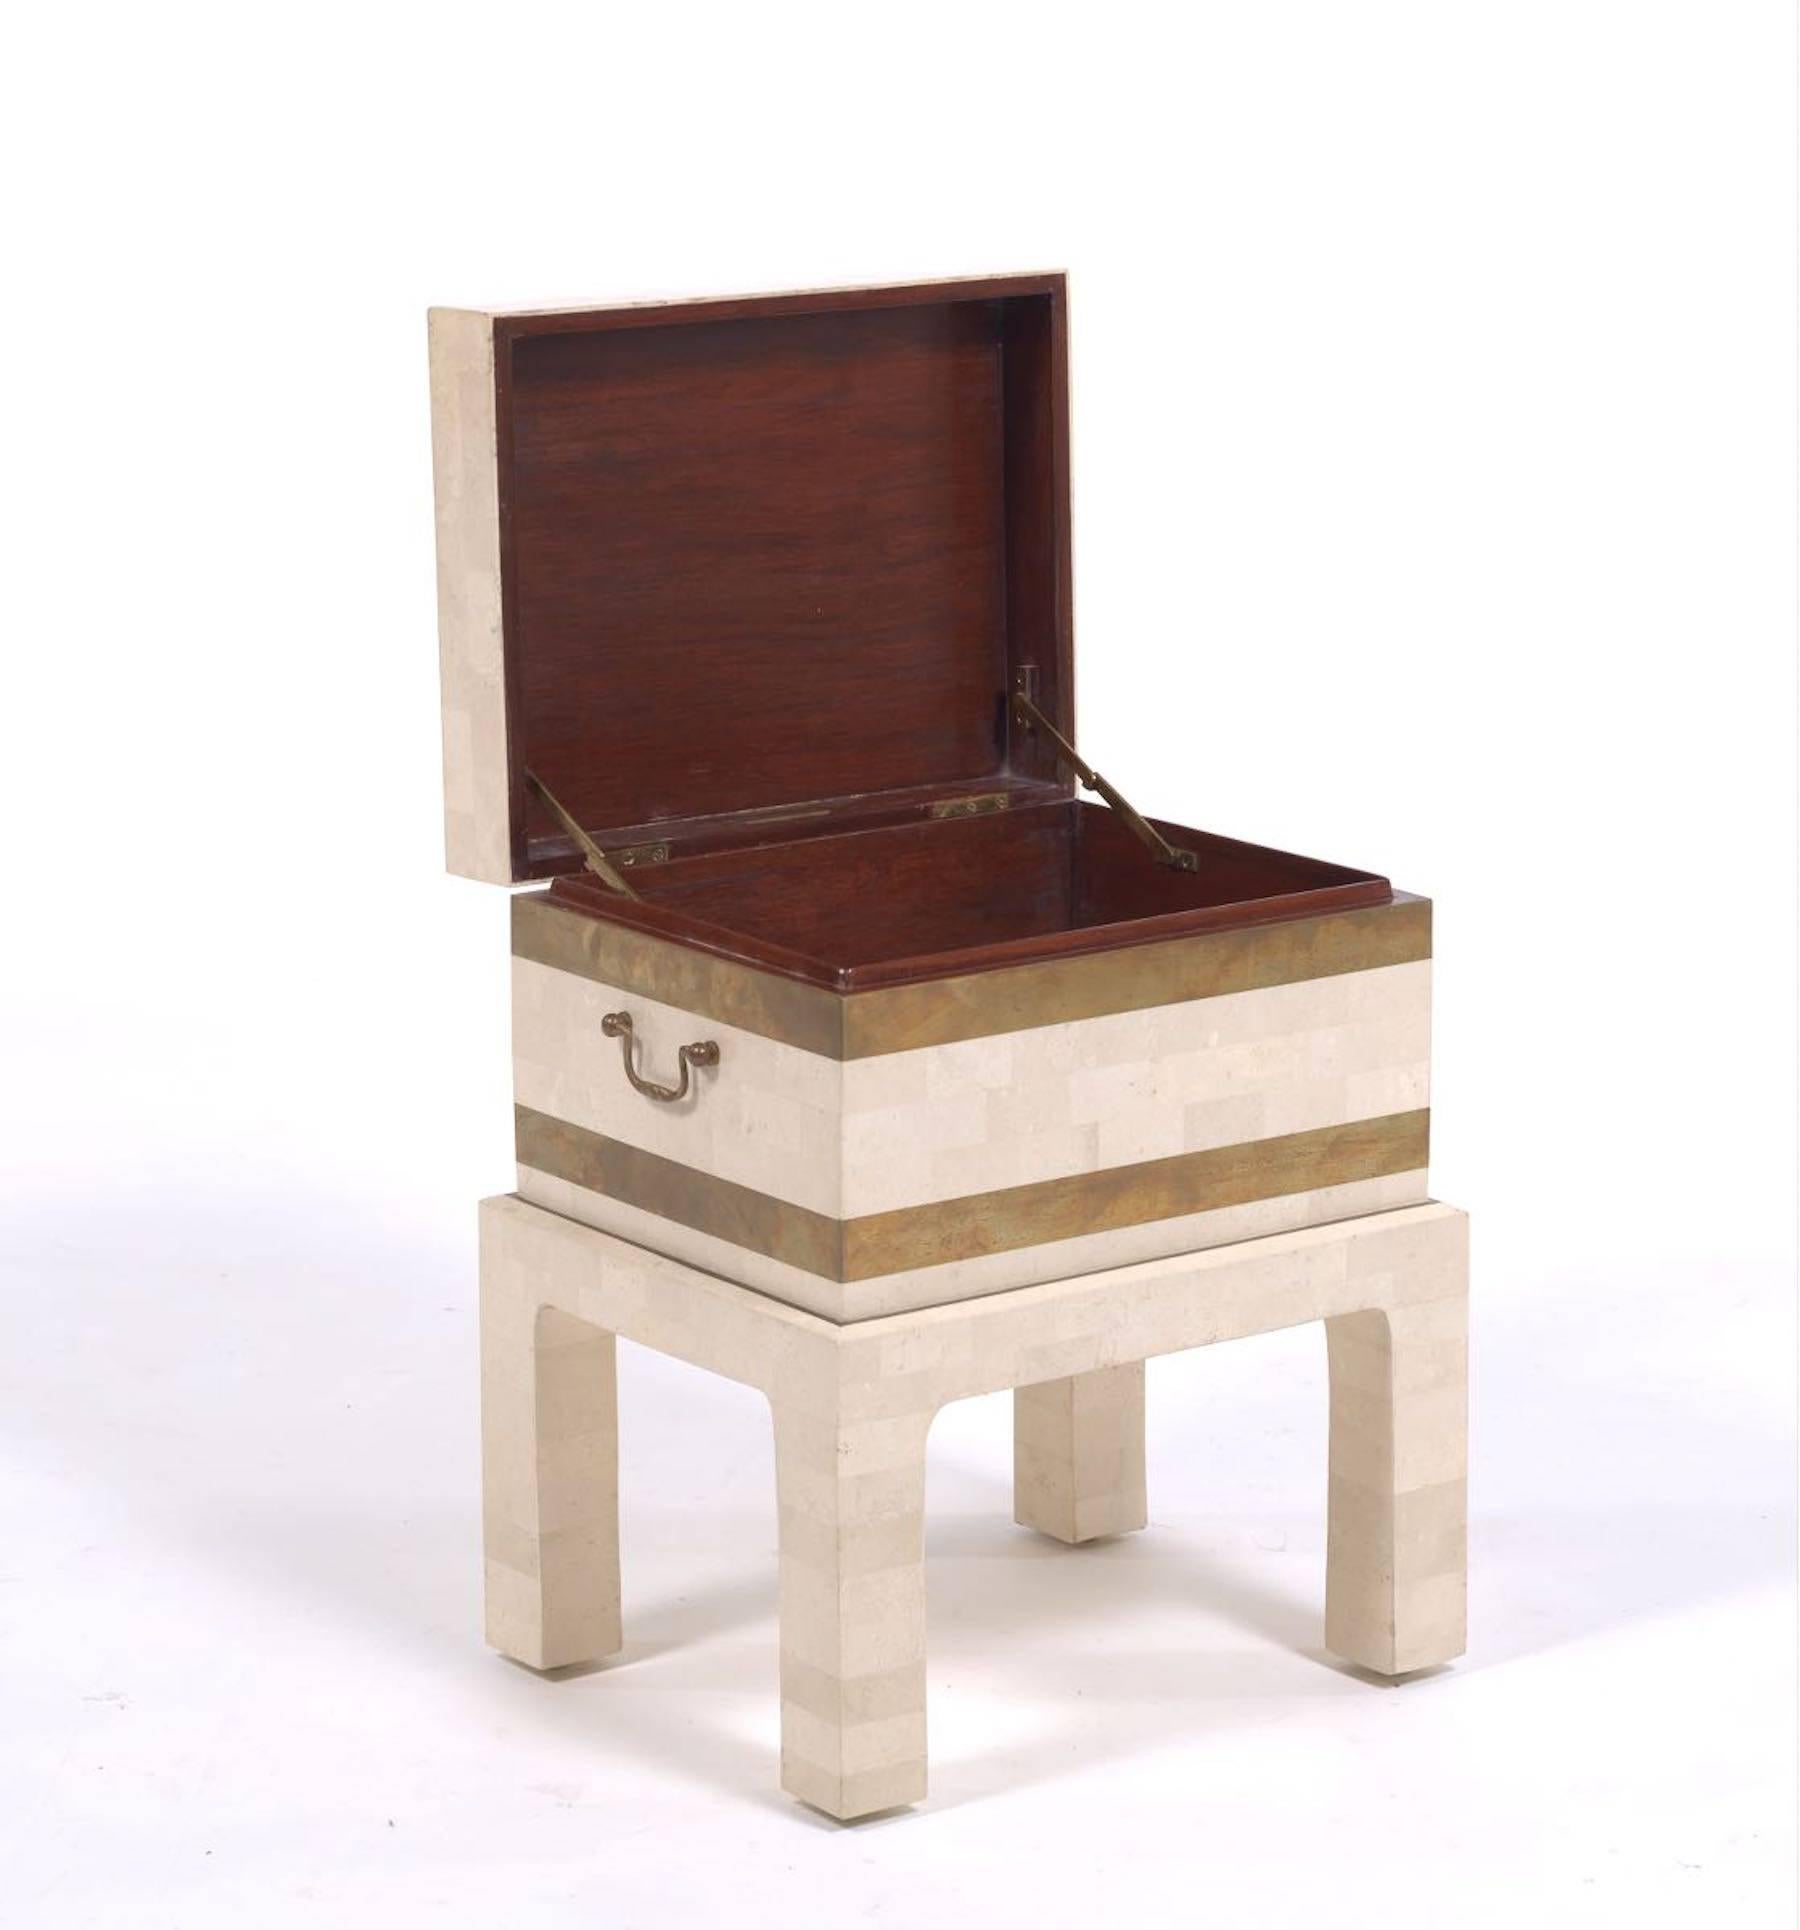 Springer Style Tessellated Stone Box on Stand
In two pieces, The box with twin brass handles and brass inlay, the interior lined with mahogany.
